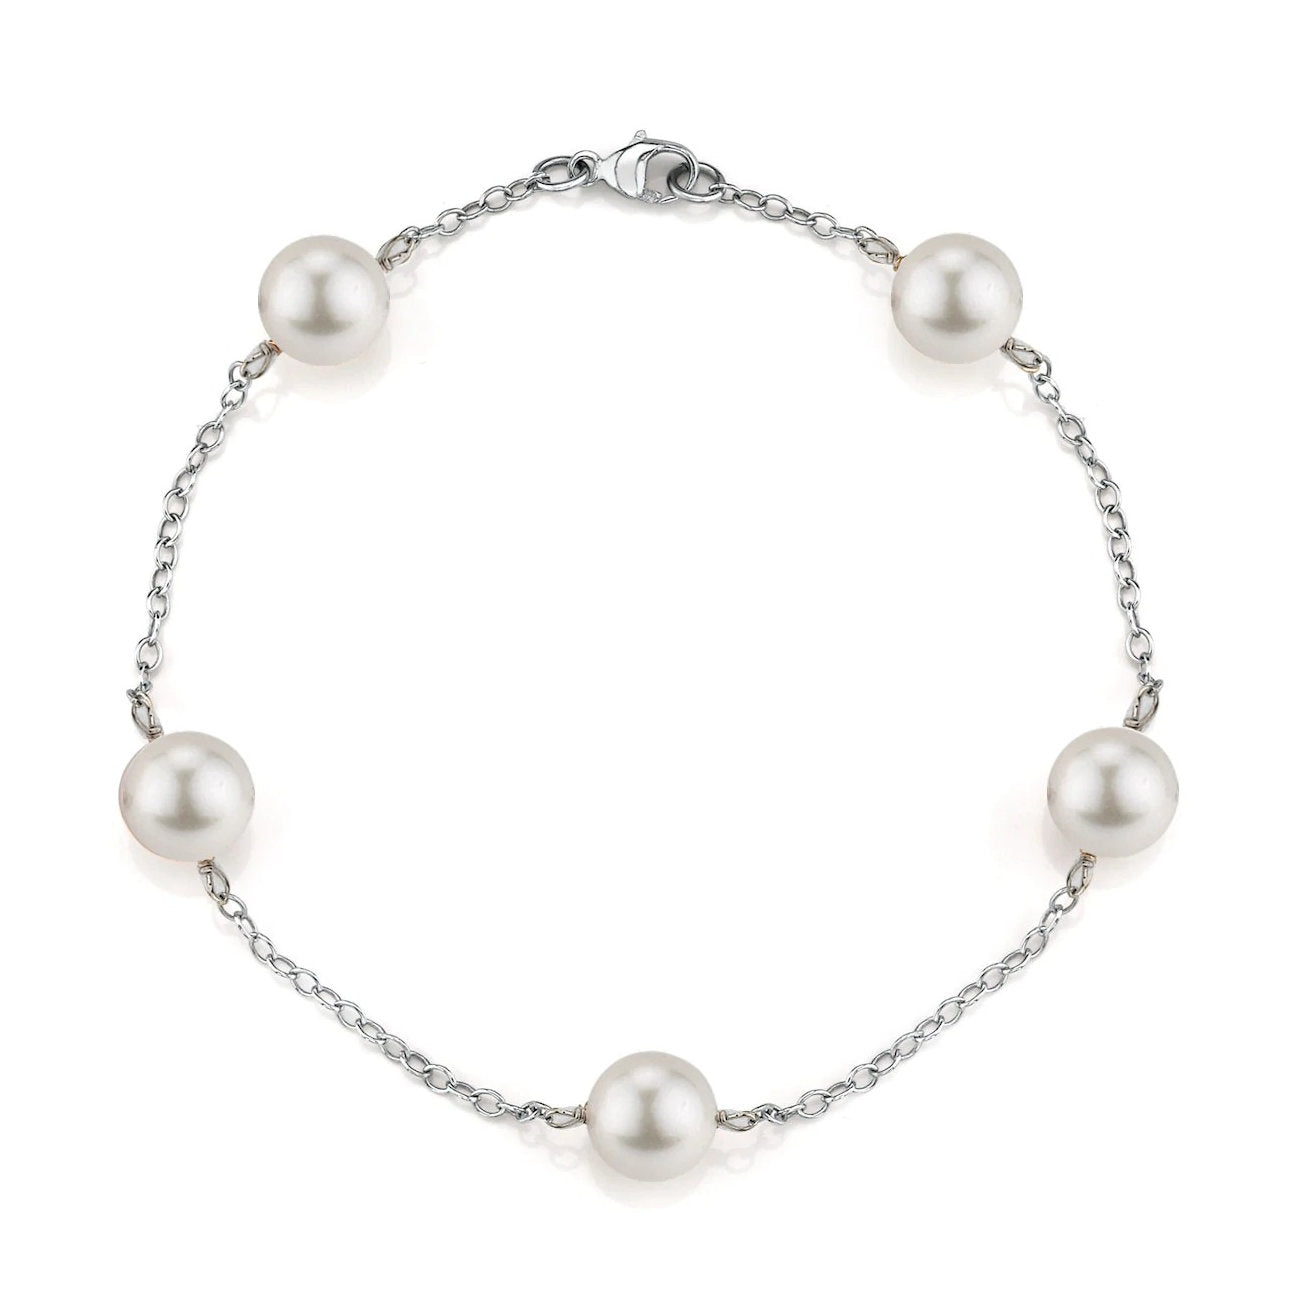 Japanese Akoya White Pearl Tincup Bracelet from Pure Pearls